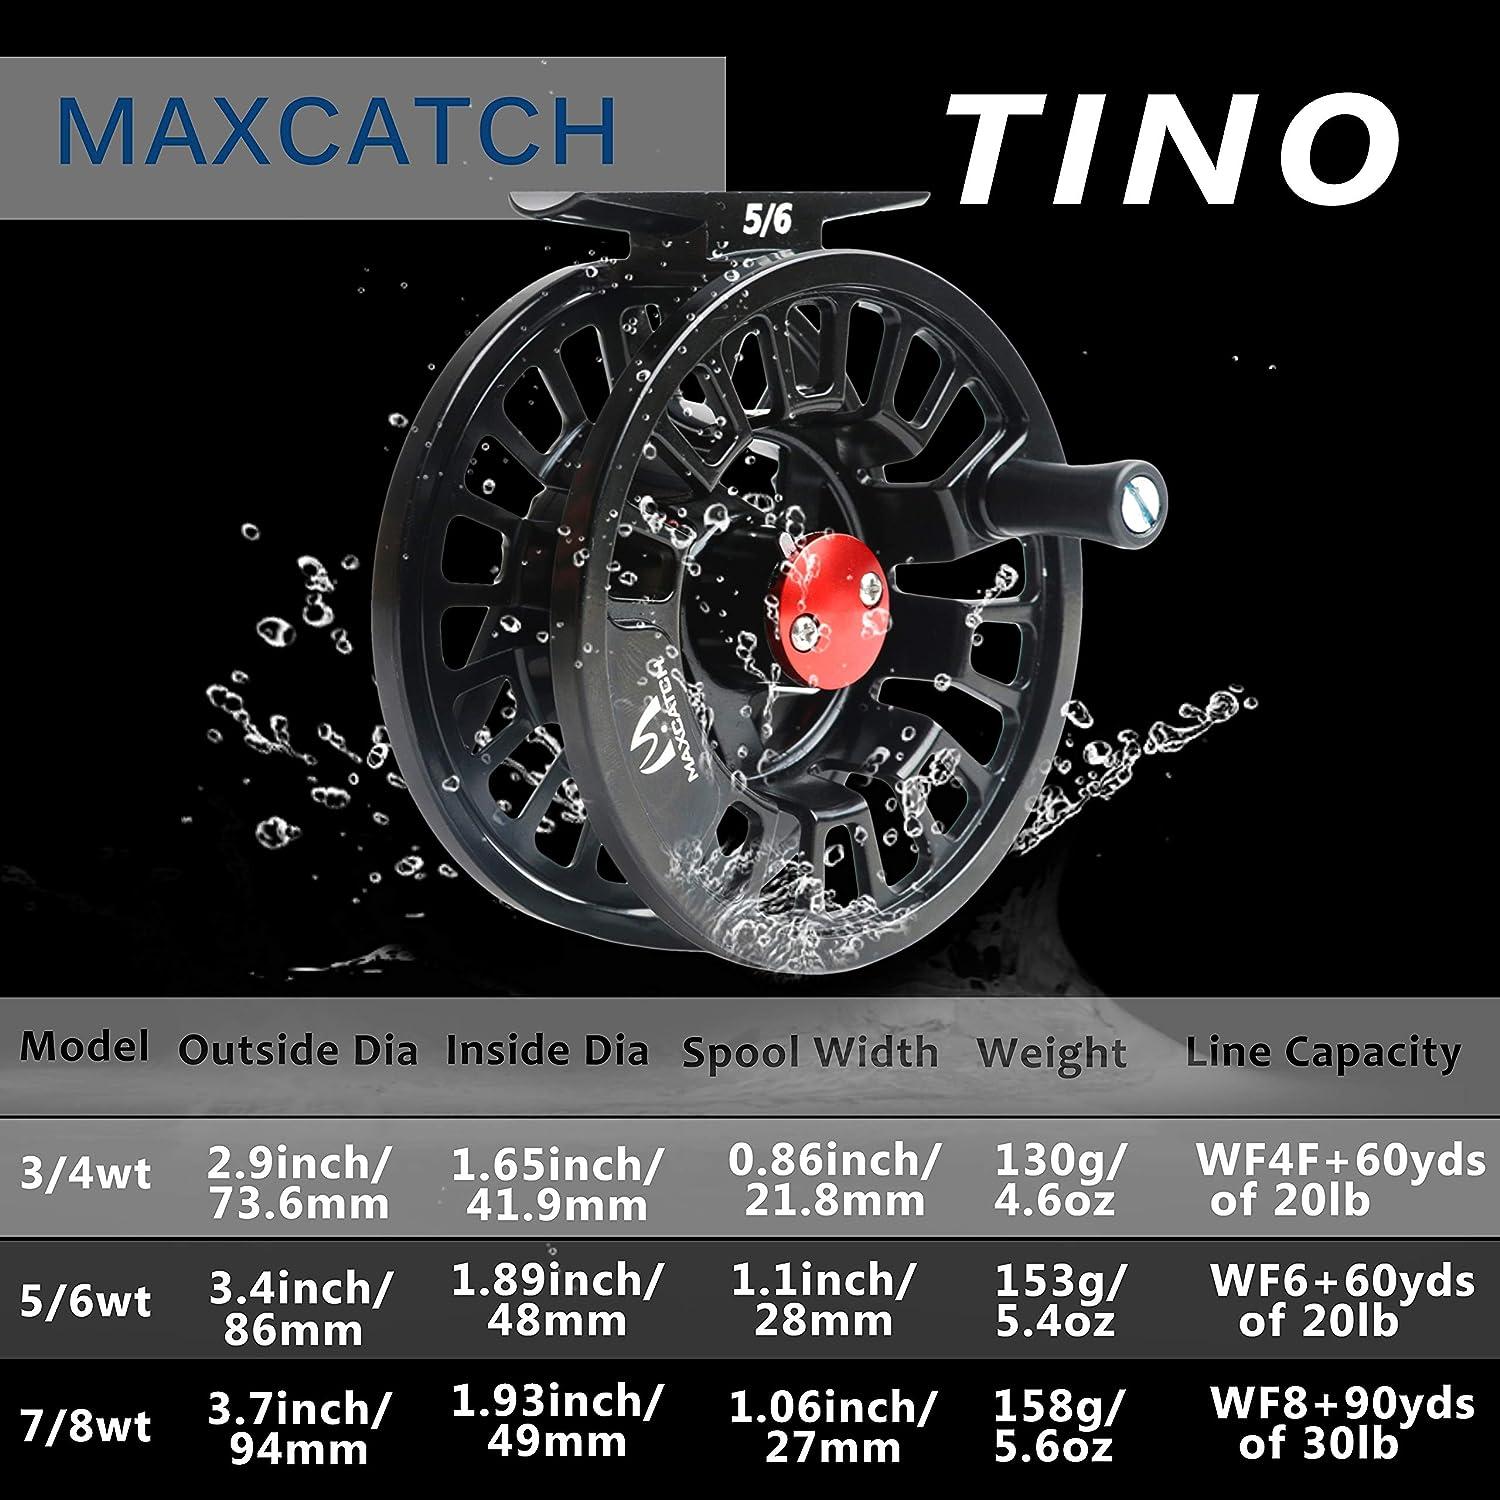 Fly Reel, CNC Processing 3 Bearings Efficient Braking Fly Fishing Reel For  Outdoor Fishing 